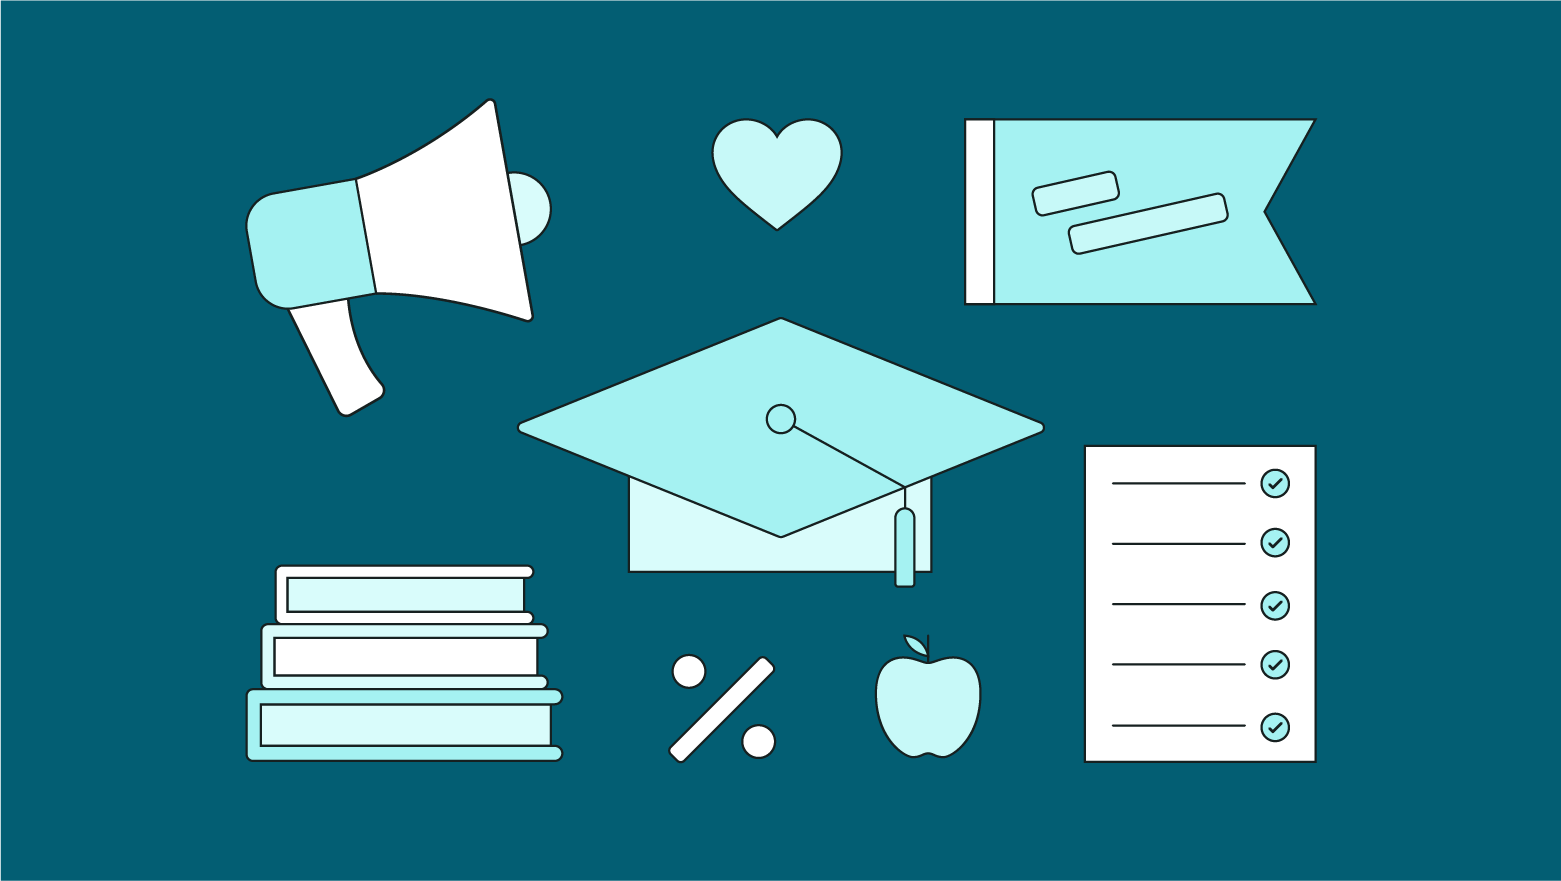 A teal background with a megaphone, graduation cap, stack of books and academic paper depicted in graphics.